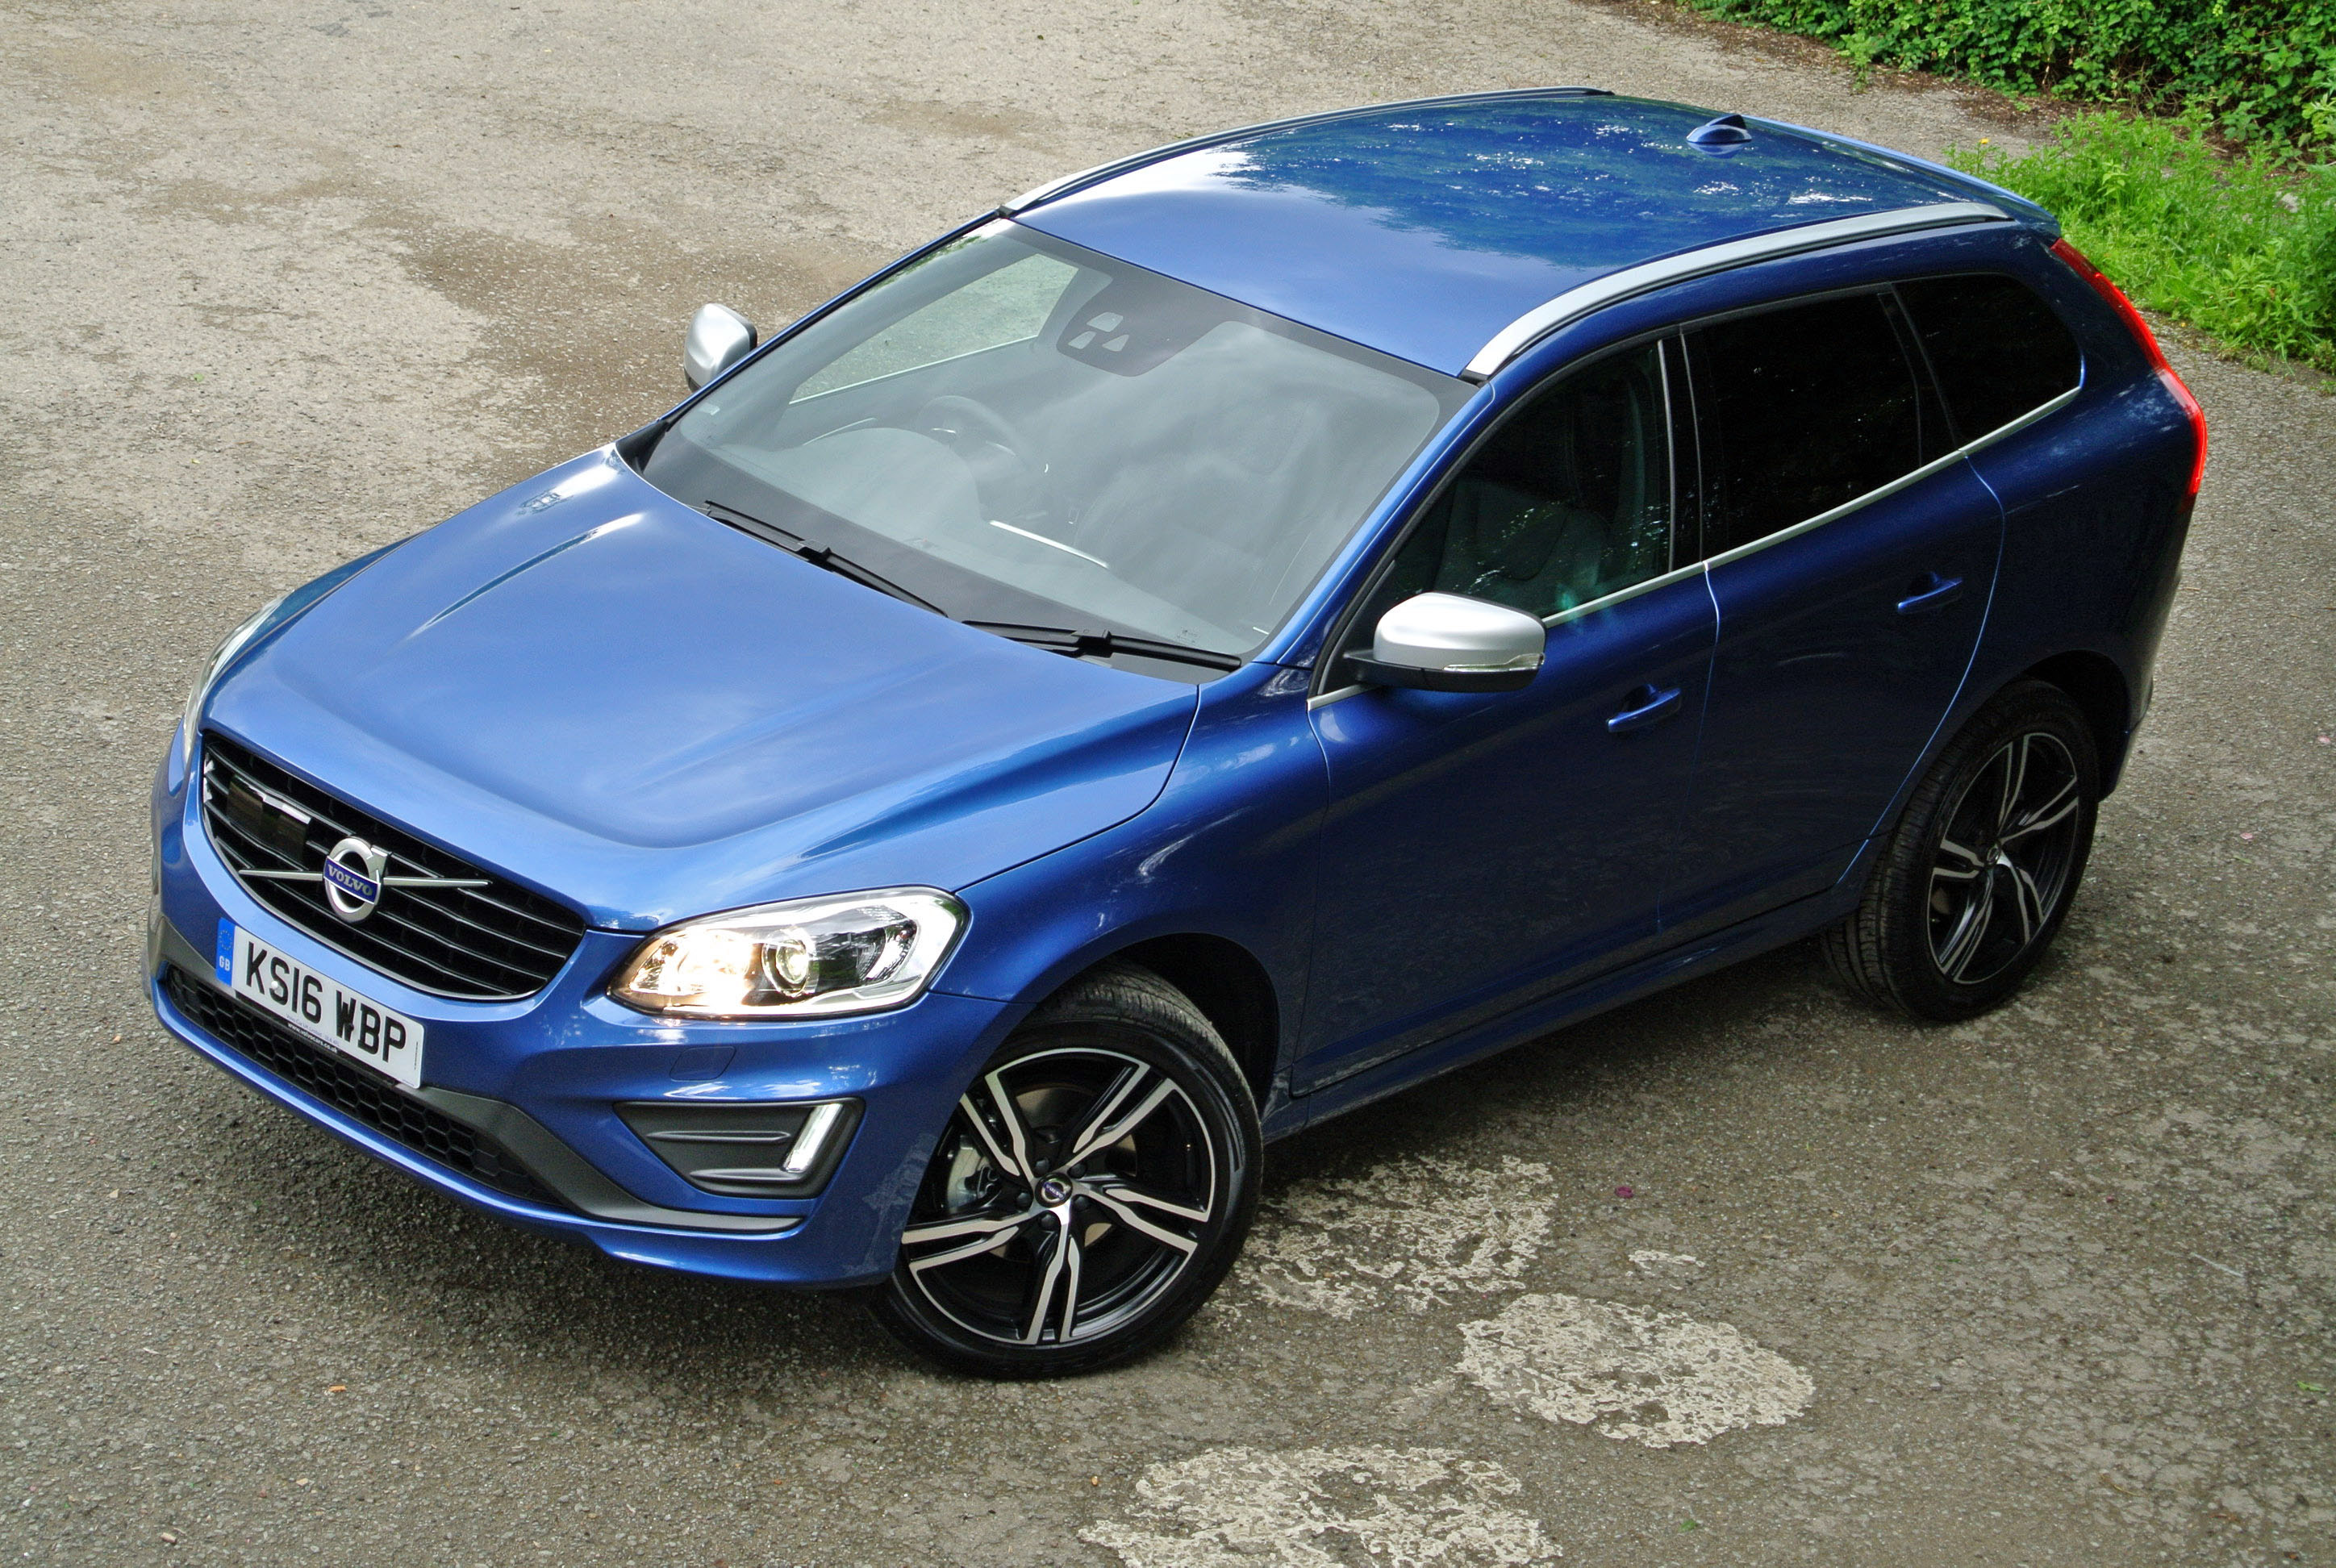 Safety still monsters Volvo’s priorities with its XC60 SUV